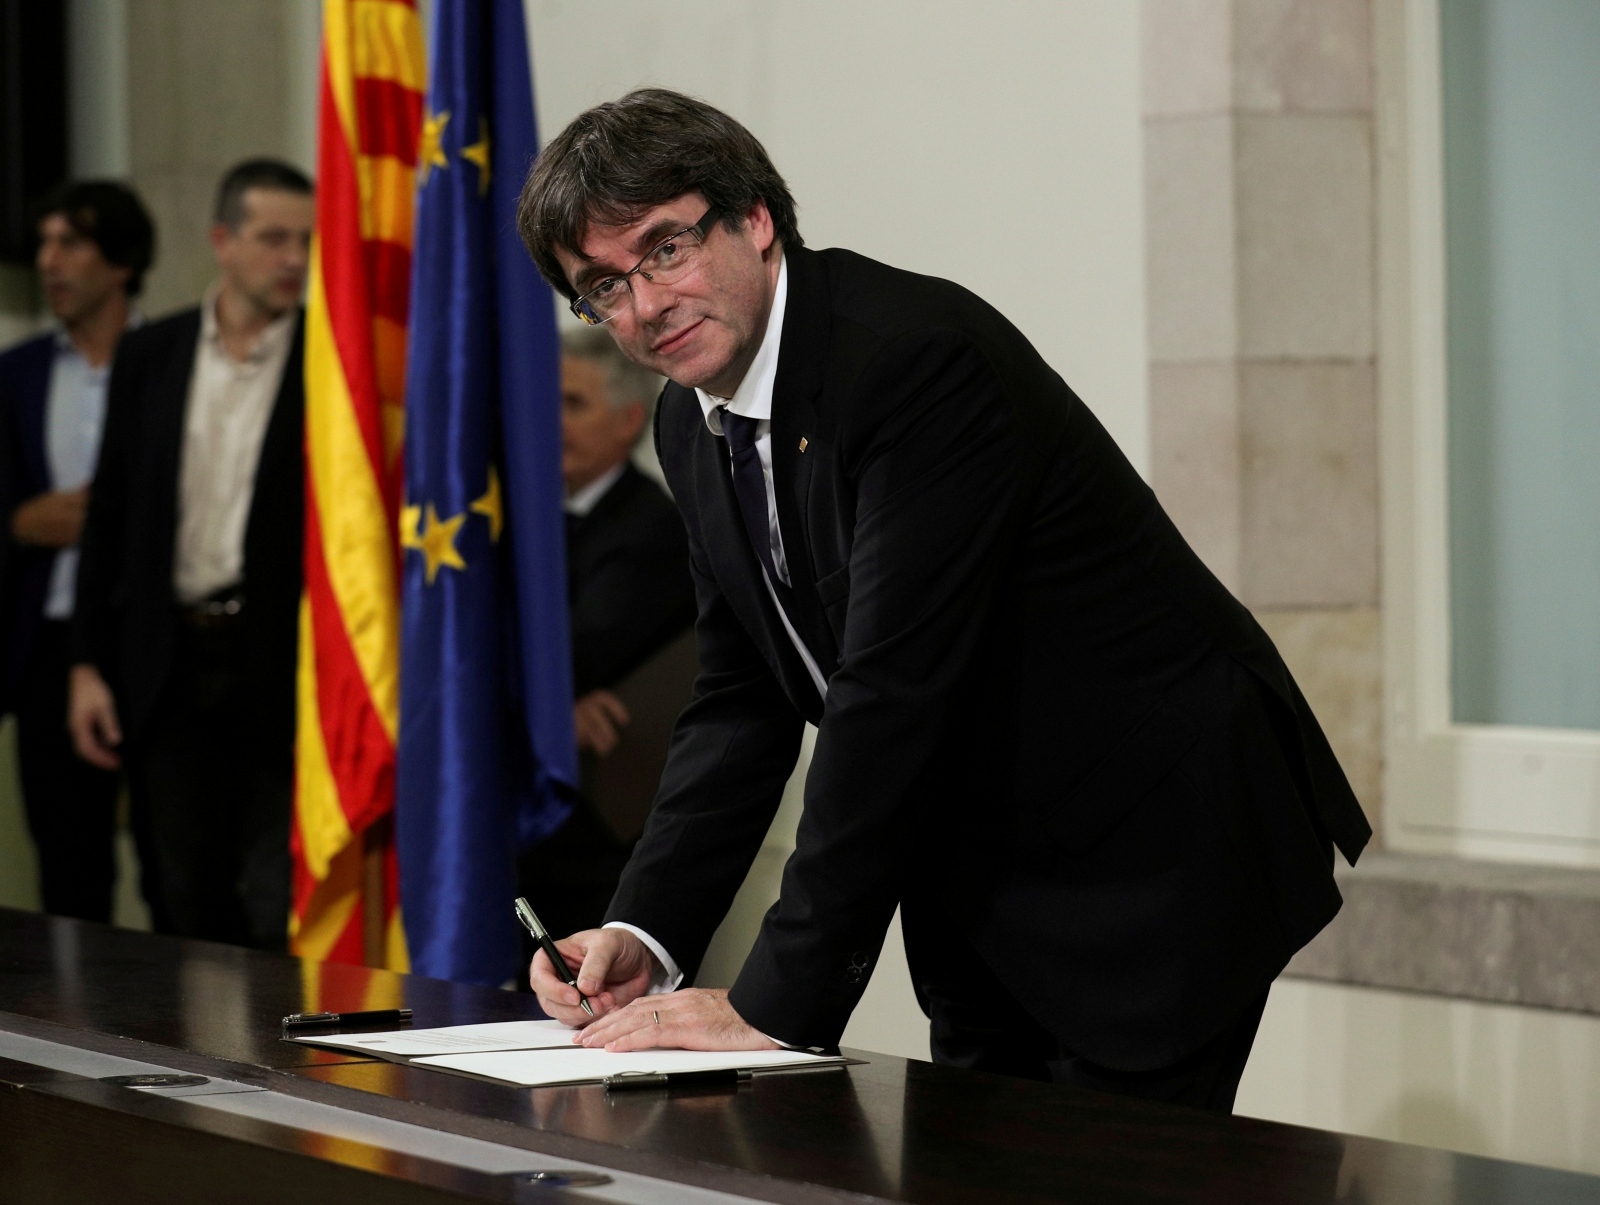 FILE PHOTO: Catalan President Carles Puigdemont signs a declaration of independence Catalan regional parliament in Barcelona FILE PHOTO: Catalan President Carles Puigdemont signs a declaration of independence at the Catalan regional parliament in Barcelona, Spain, October 10, 2017. REUTERS/Albert Gea/File Photo Albert Gea